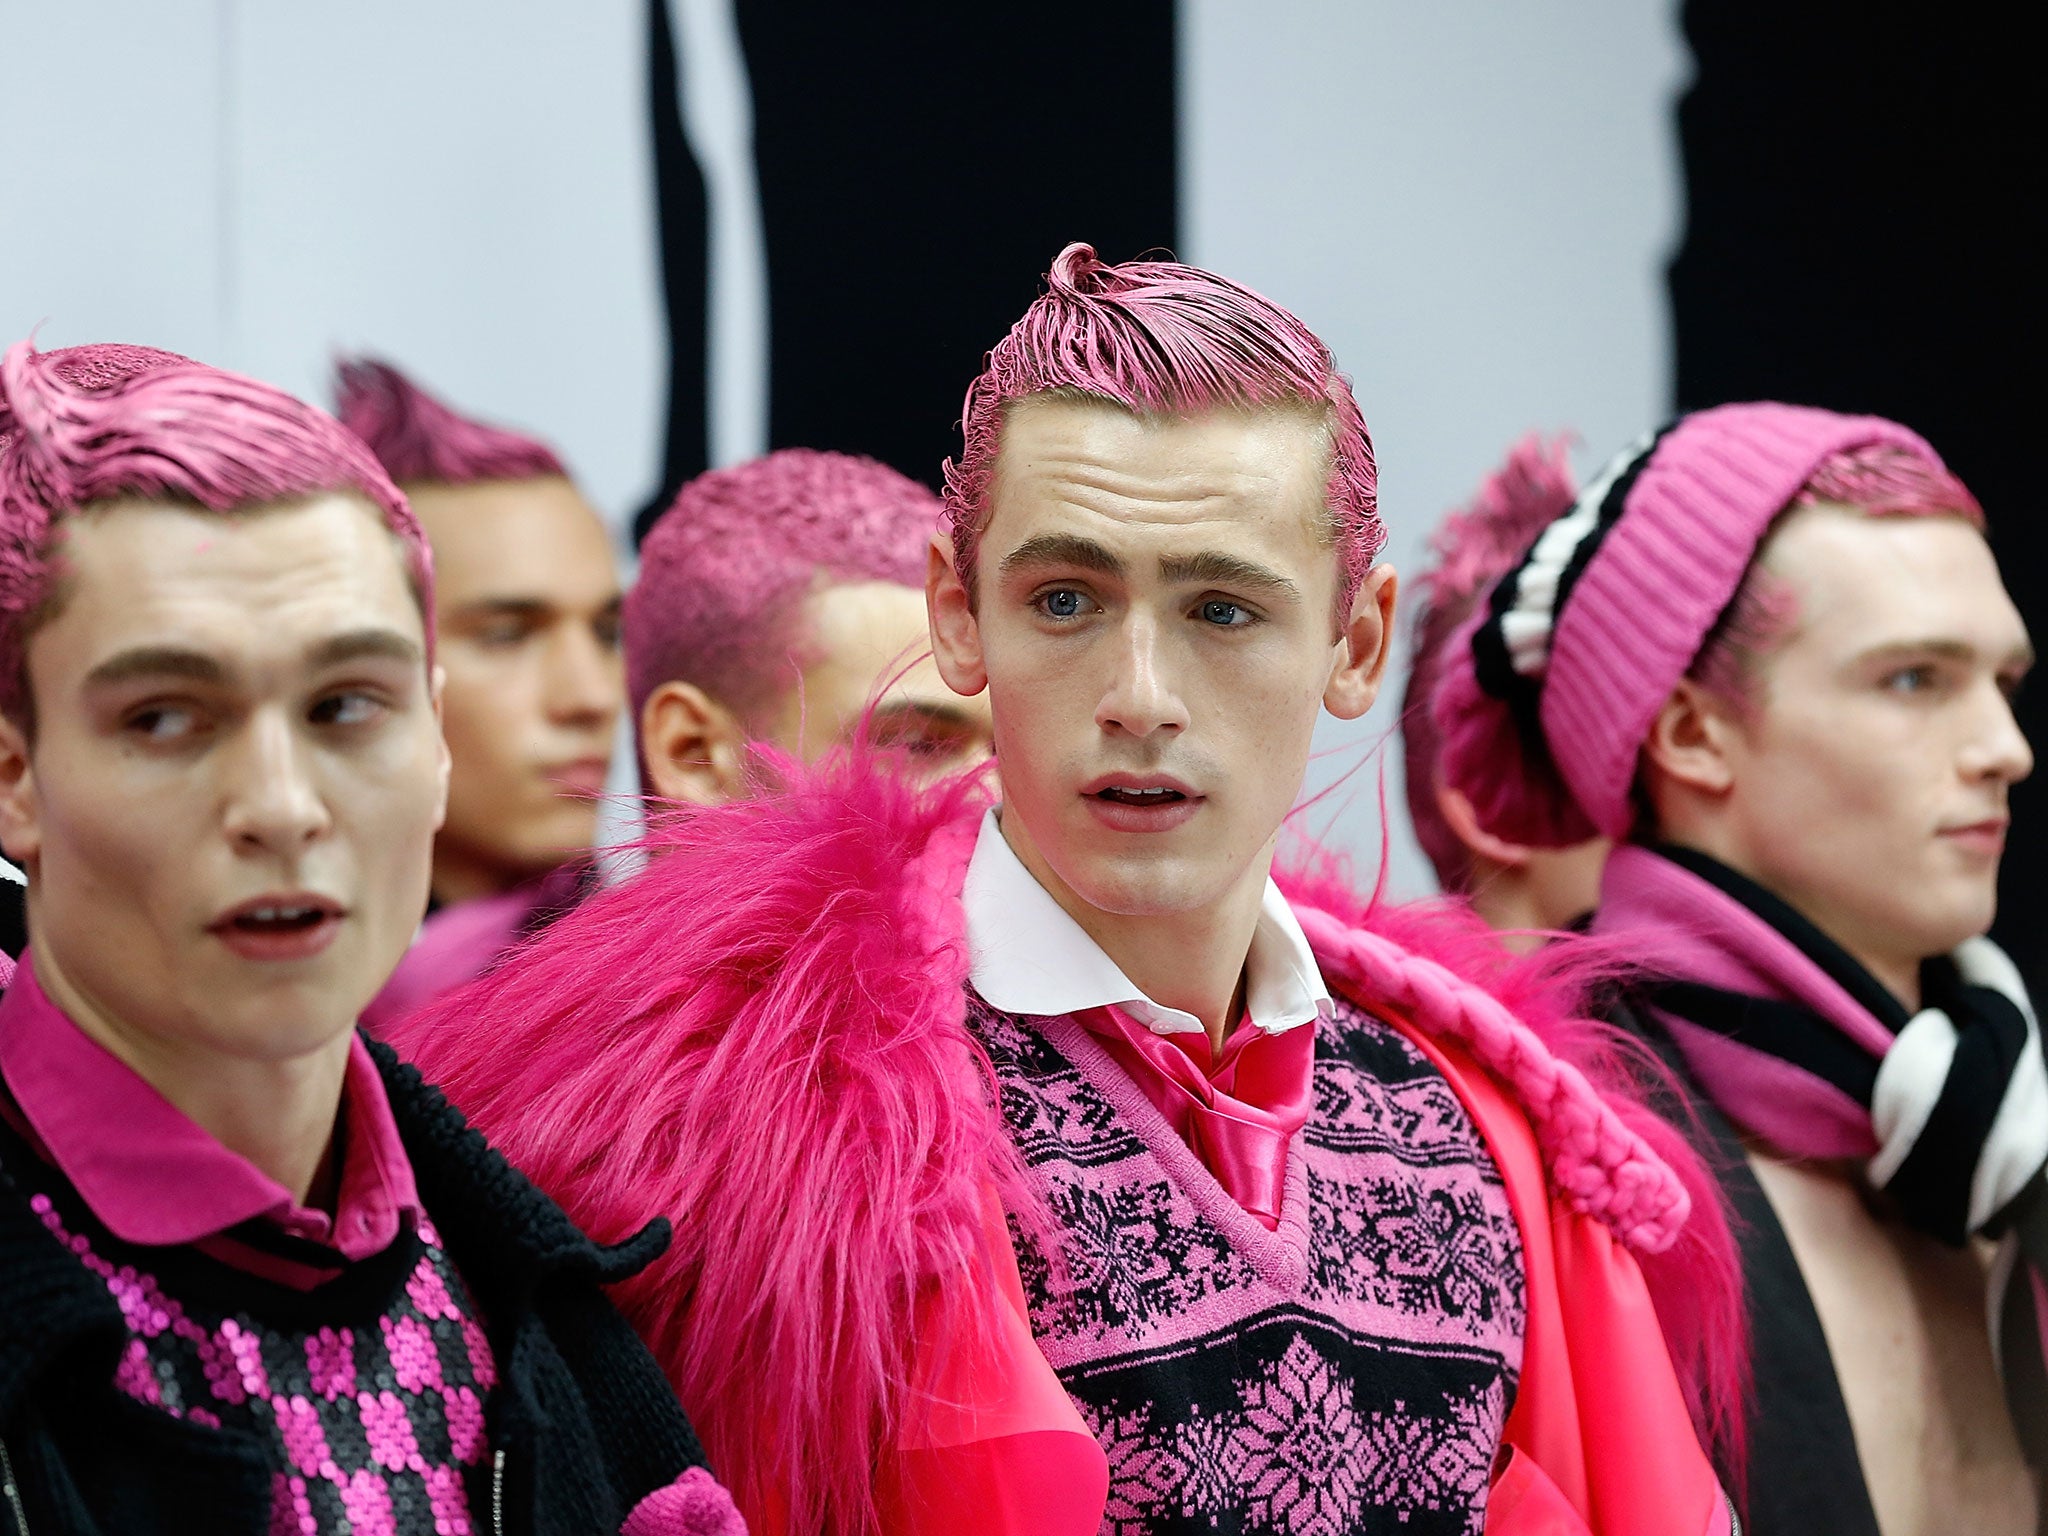 Models walk the runway during the Sibling show at the London Collections: Men AW15 at Victoria House in London